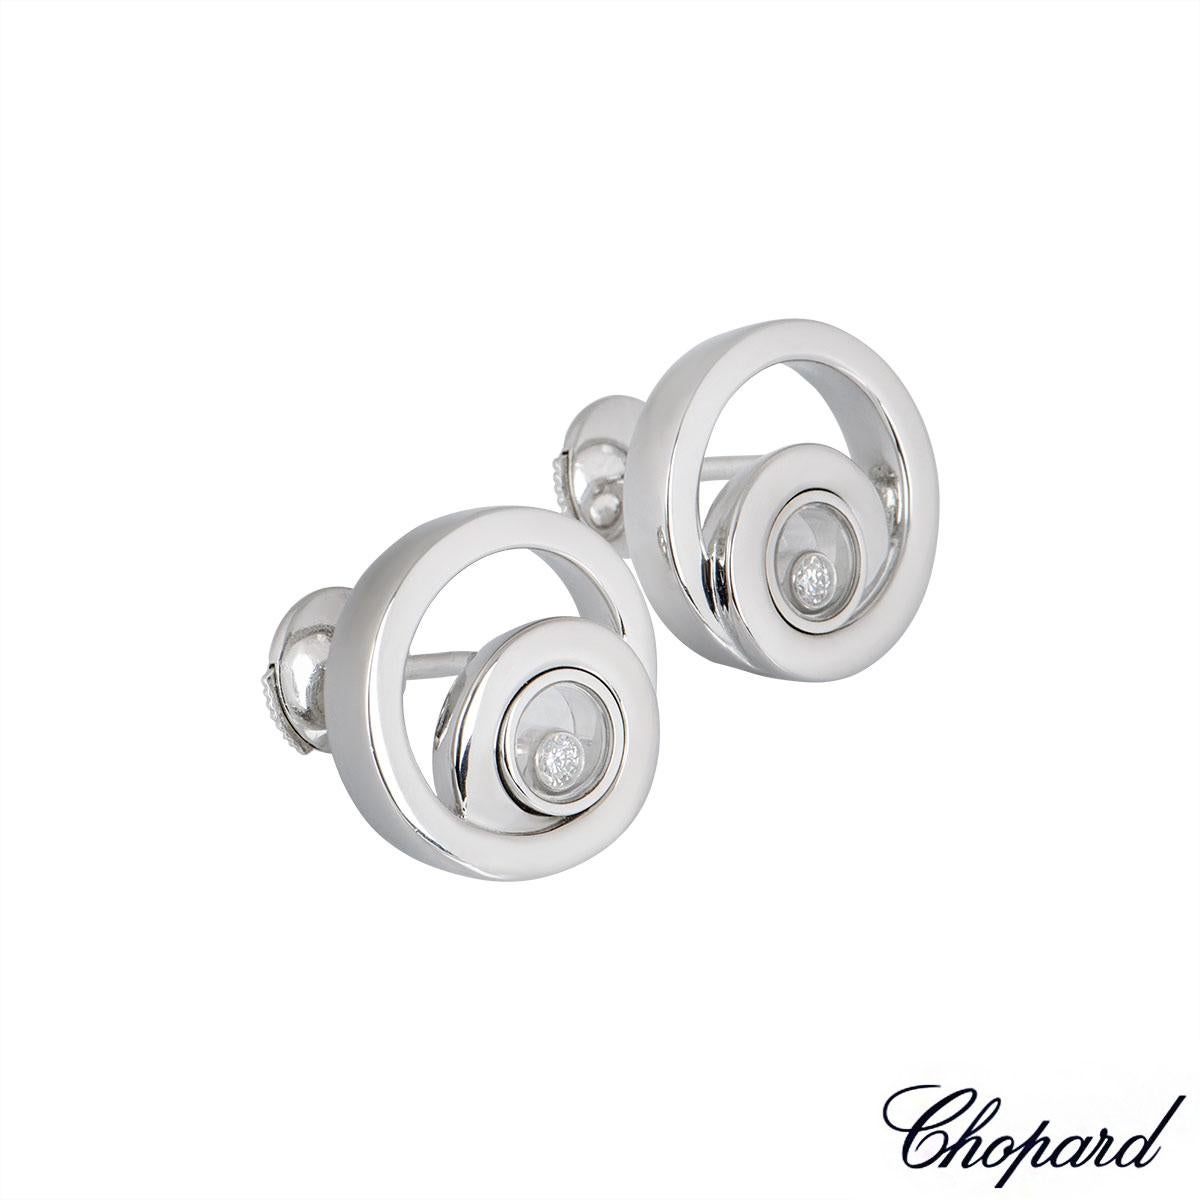 A pair of 18k white gold earrings by Chopard from the Happy Diamonds collection. The earrings are composed of two entwined circular motifs featuring the iconic floating diamond enclosed between two pieces of Chopard signed glass totalling 0.11ct.